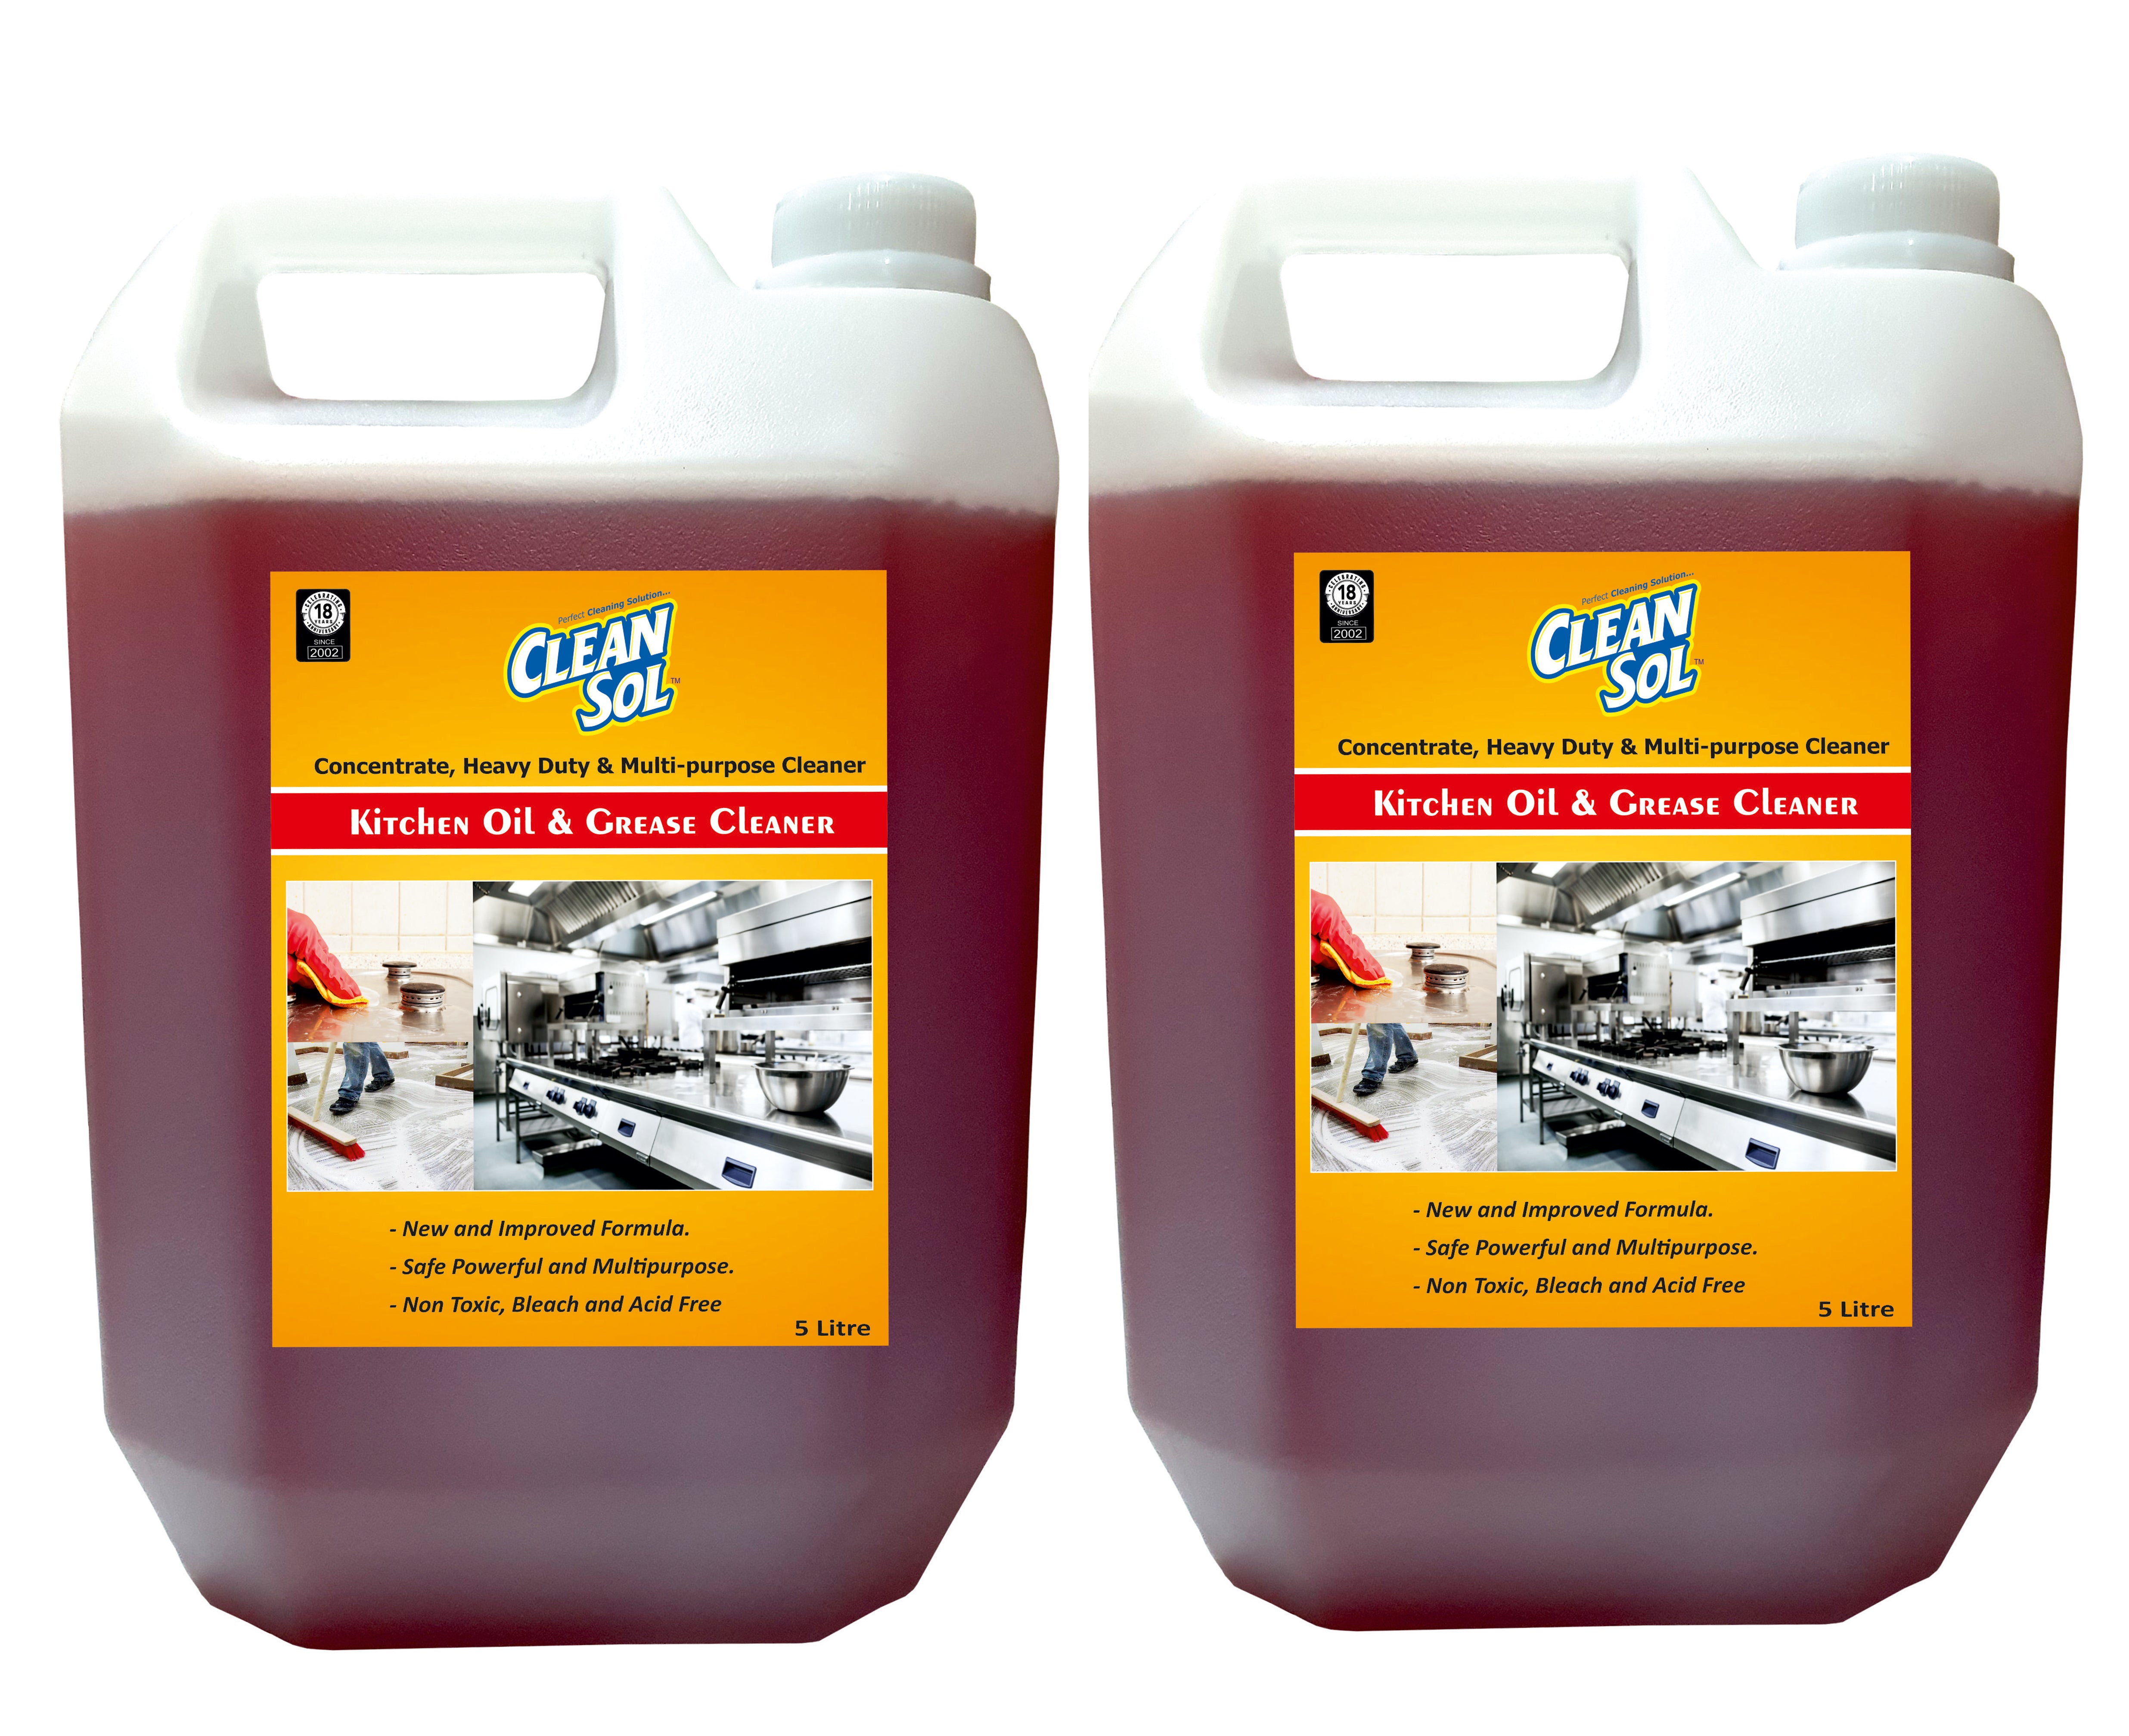 Cleansol Power HD (Kitchen Oil & Grease Cleaner) -1 Ltr